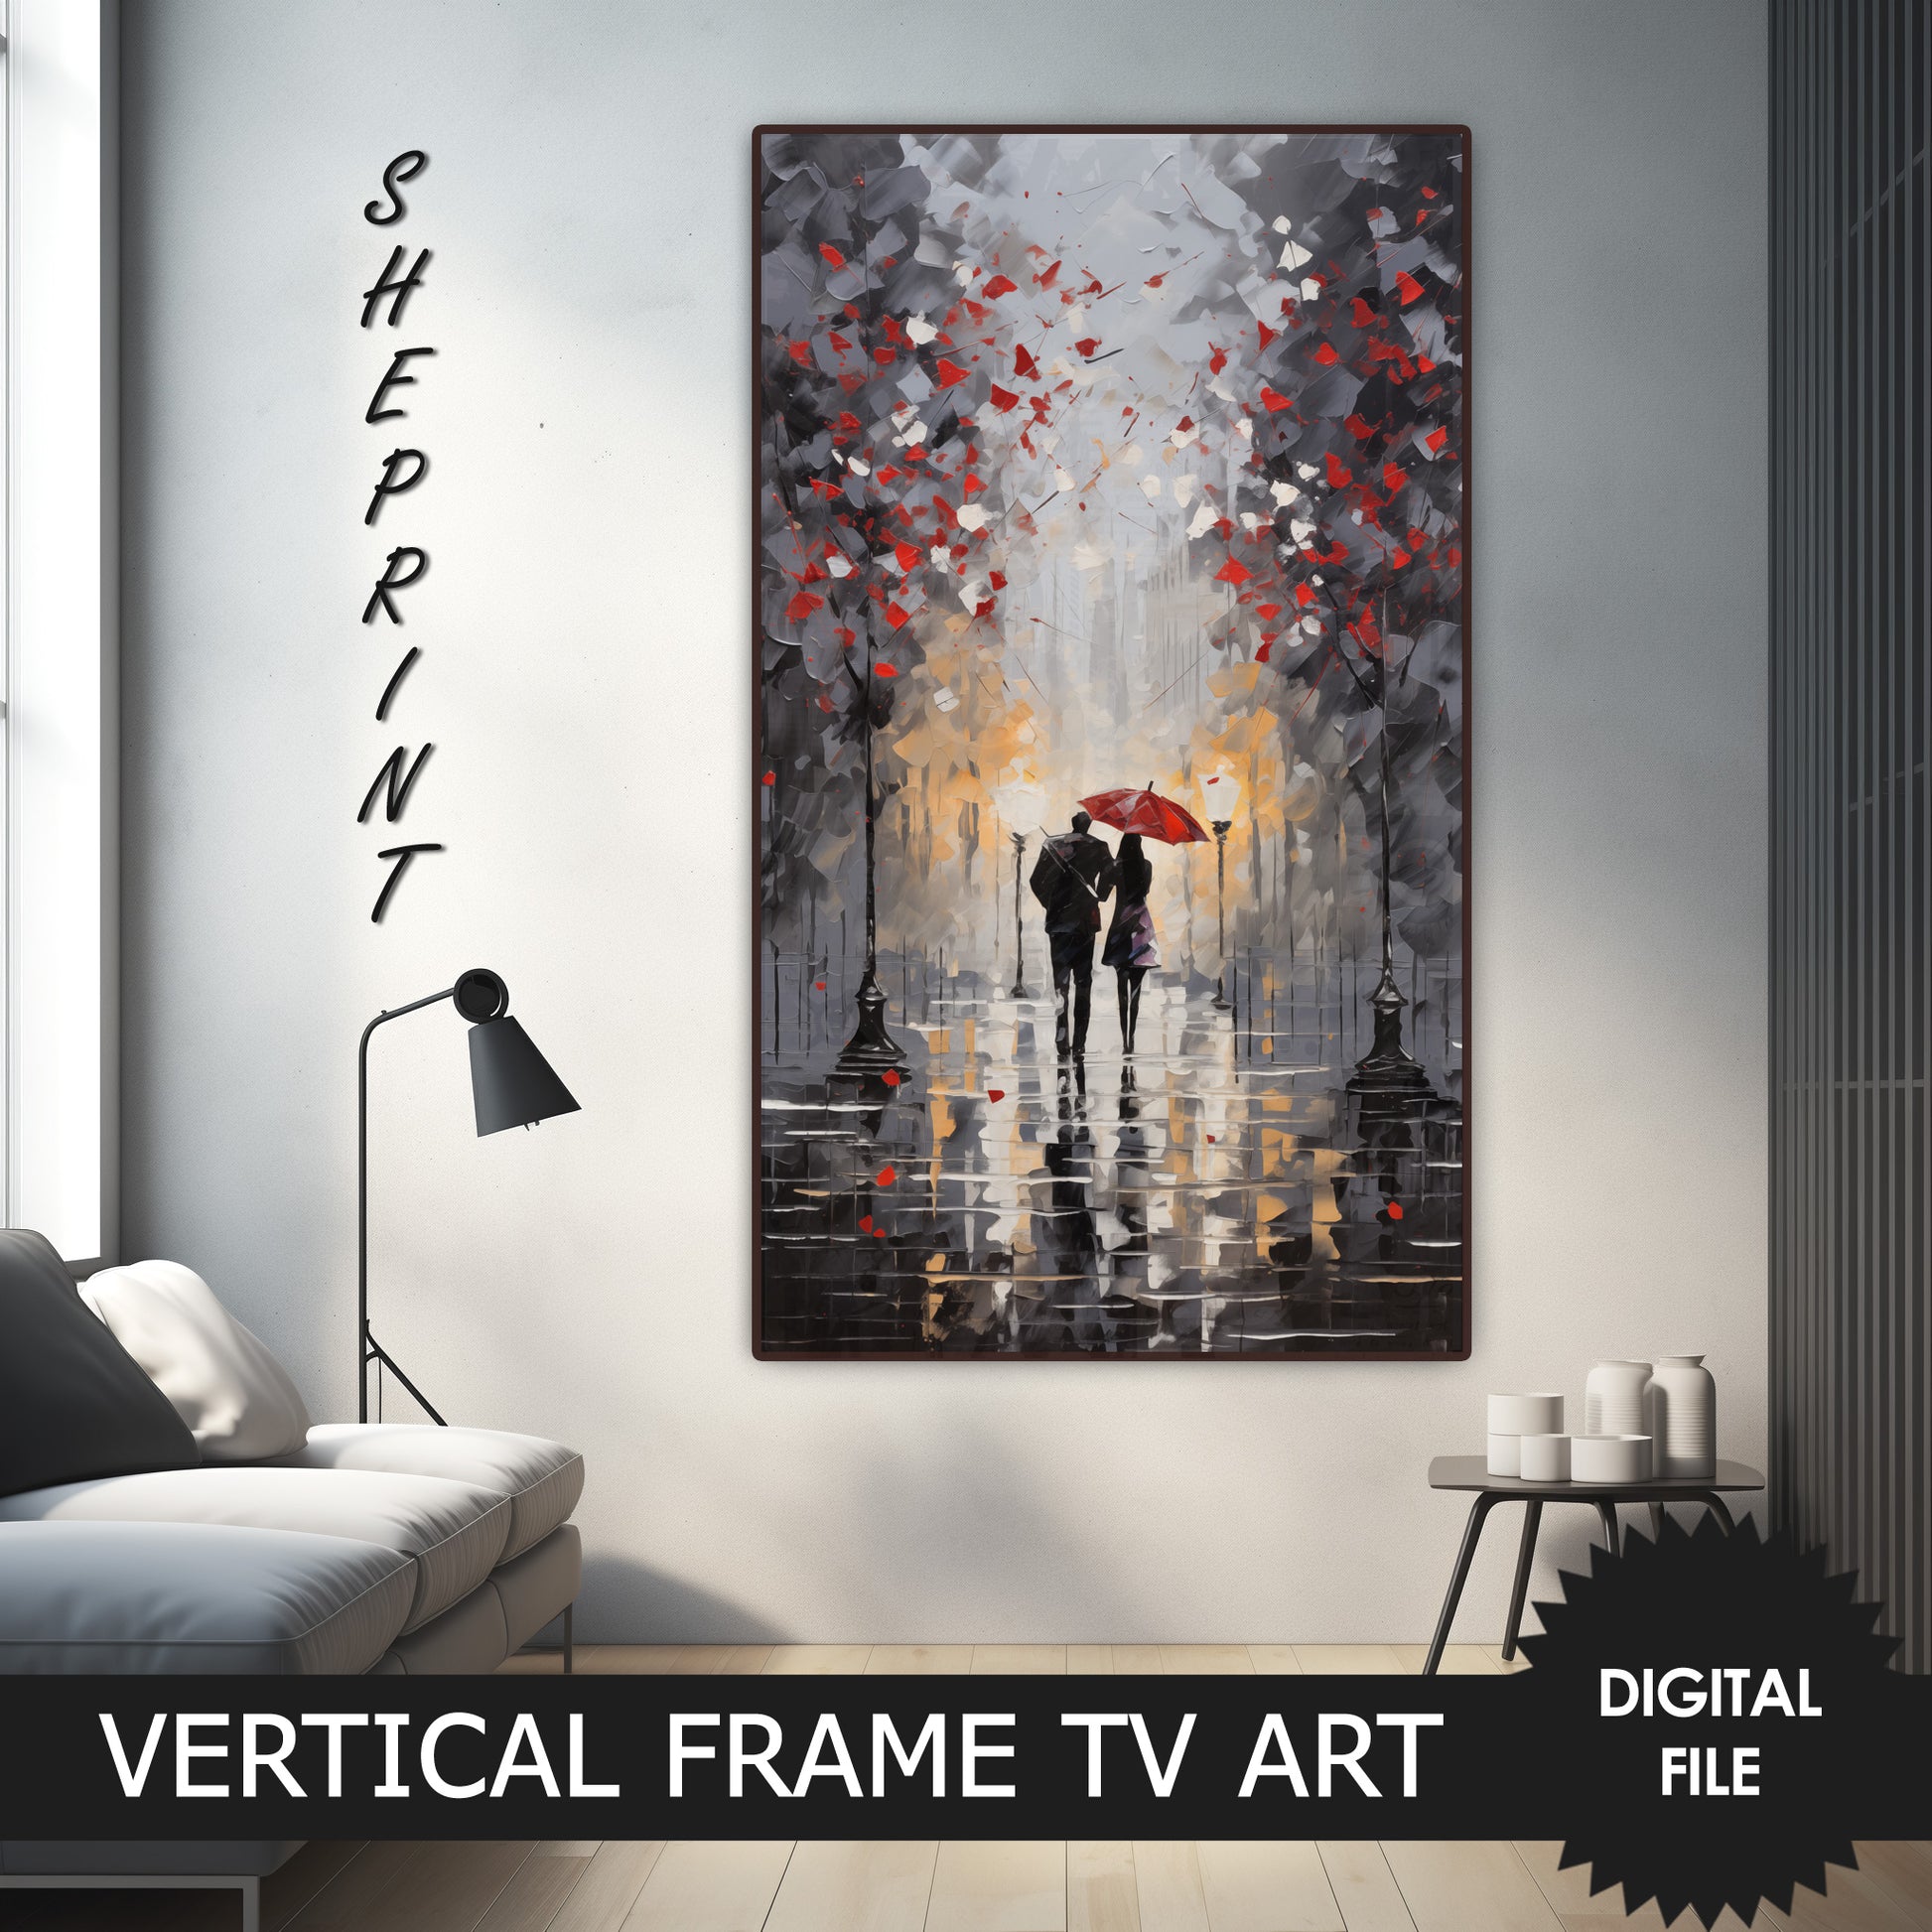 Valentines Day Couple, Vertical Frame TV Art, Happy Valentines Day Abstract Art preview on samsung frame tv when mounted vertically